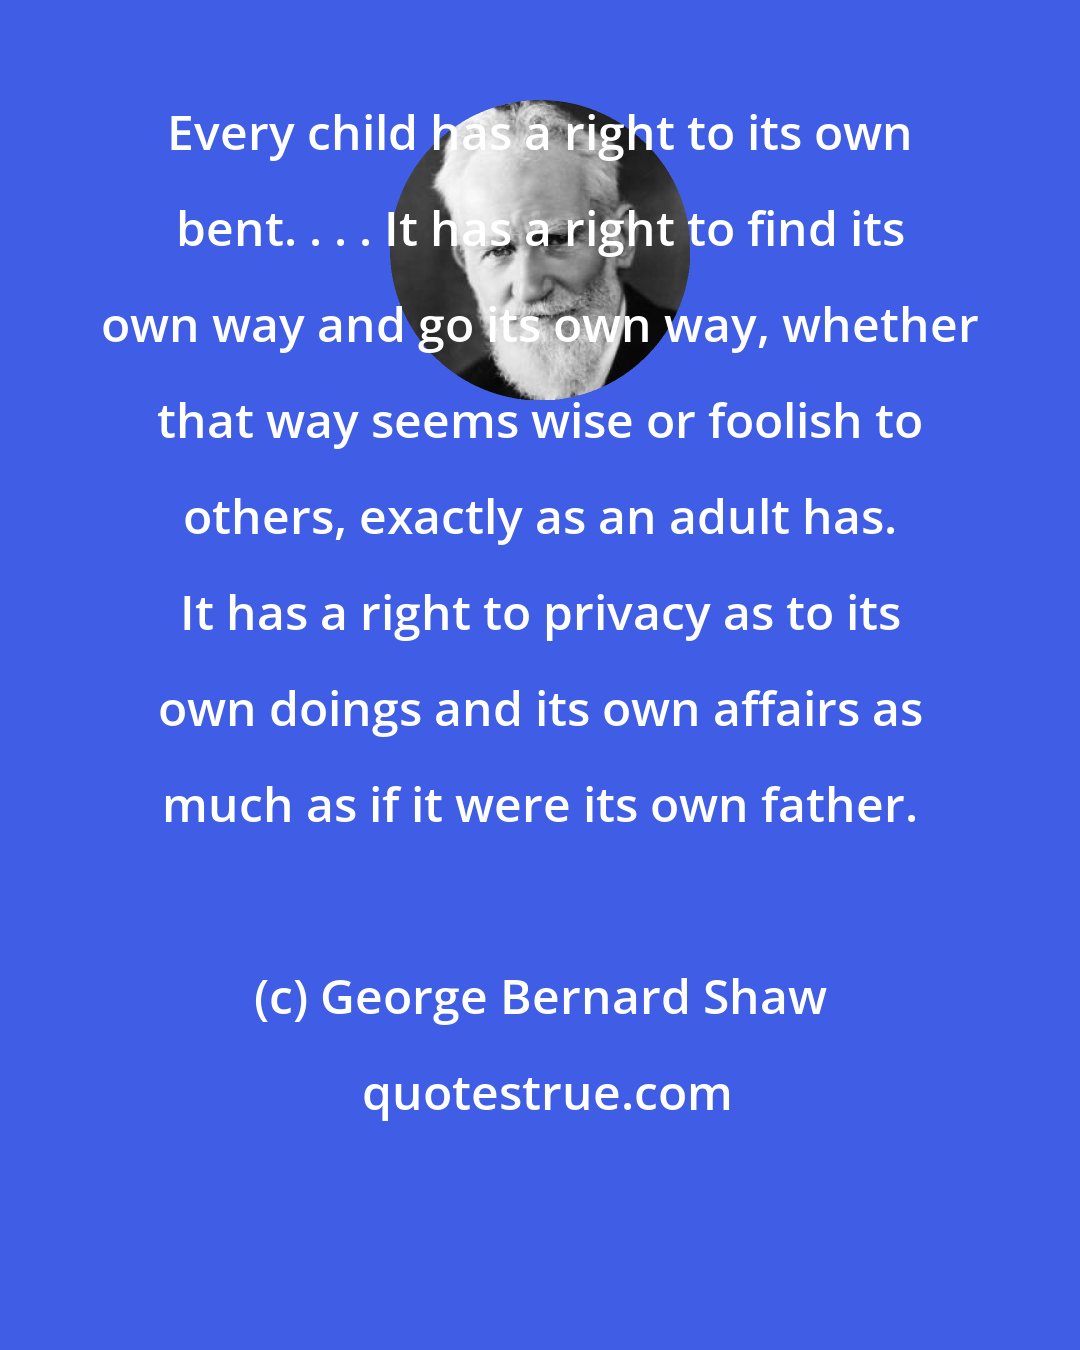 George Bernard Shaw: Every child has a right to its own bent. . . . It has a right to find its own way and go its own way, whether that way seems wise or foolish to others, exactly as an adult has. It has a right to privacy as to its own doings and its own affairs as much as if it were its own father.